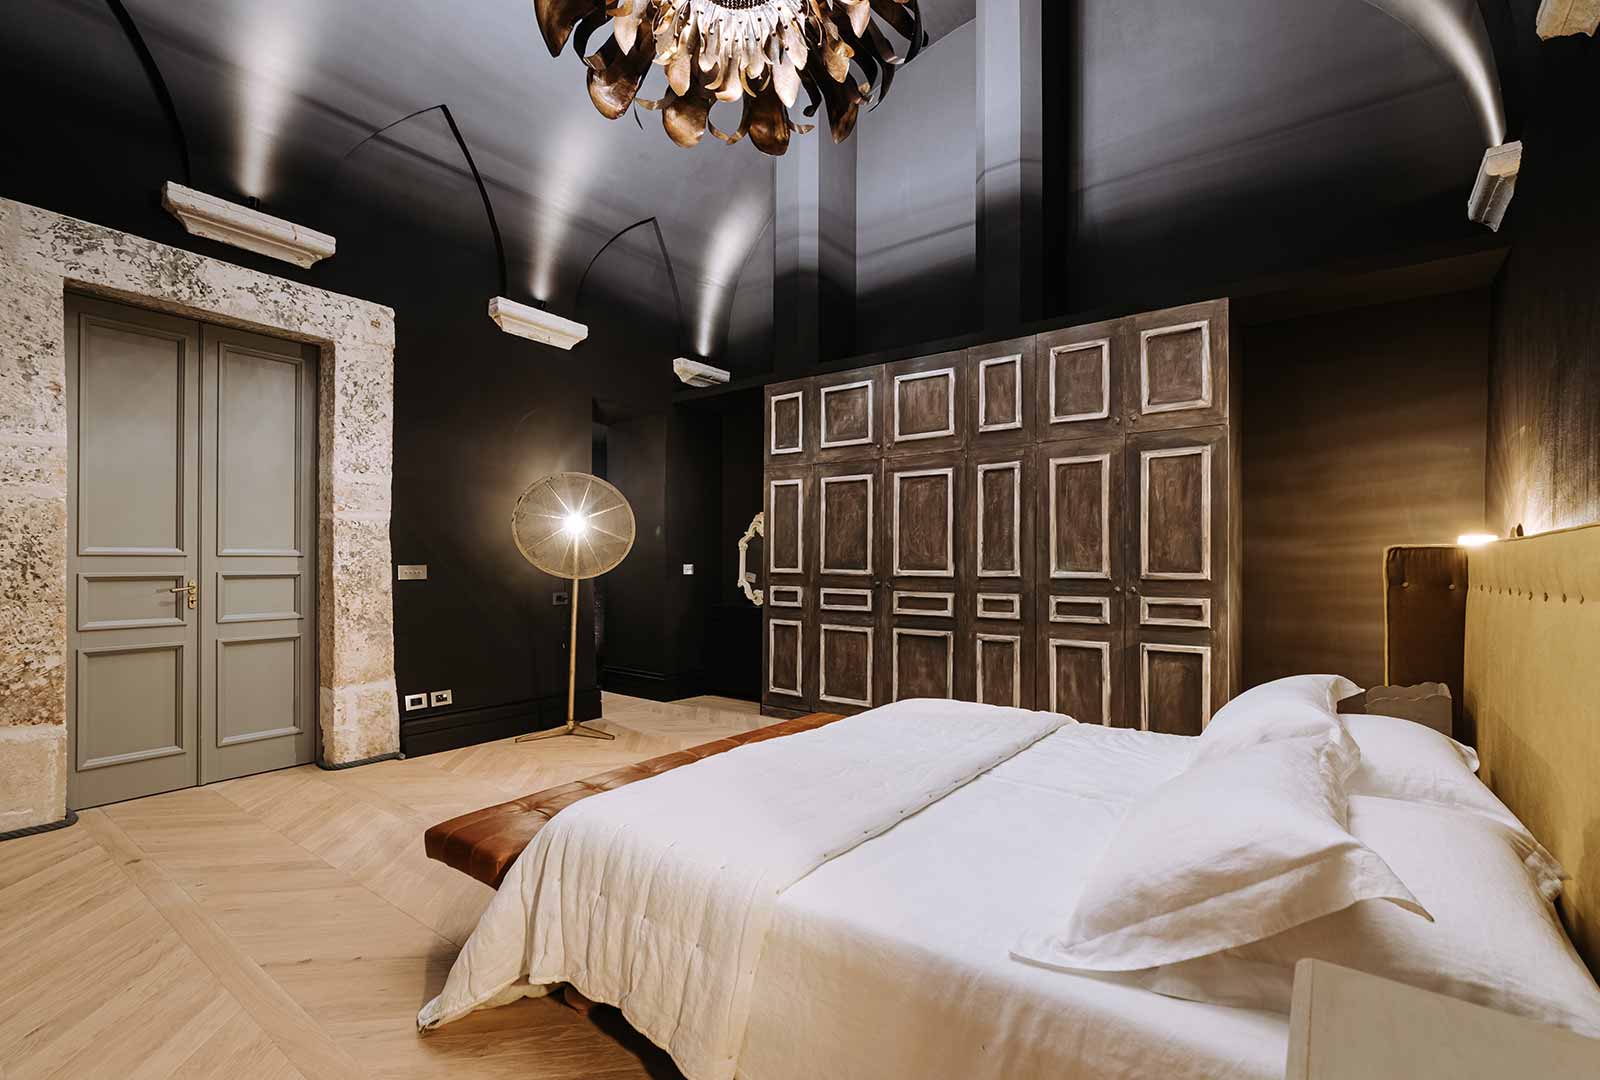 Palazzo Rosso is reborn as boutique hotel Paragon 700